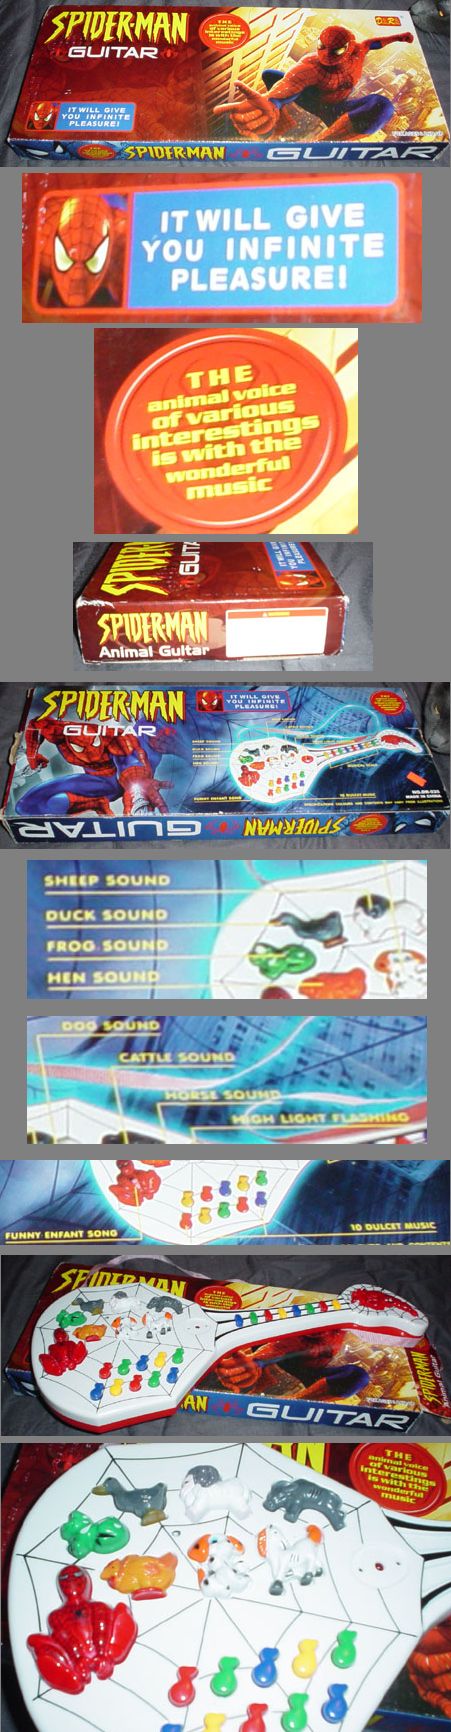 SPIDERMAN GUITAR
 IT WILL GIVE YOU INFINITE PLEASURE!
 THE animals voice of various interestings  is with the wonderful music.
 SHEEP SOUND
 DUCK SOUND
 FROG SOUND
 HEN SOUND
 DOG SOUND
 CATTLE SOUND